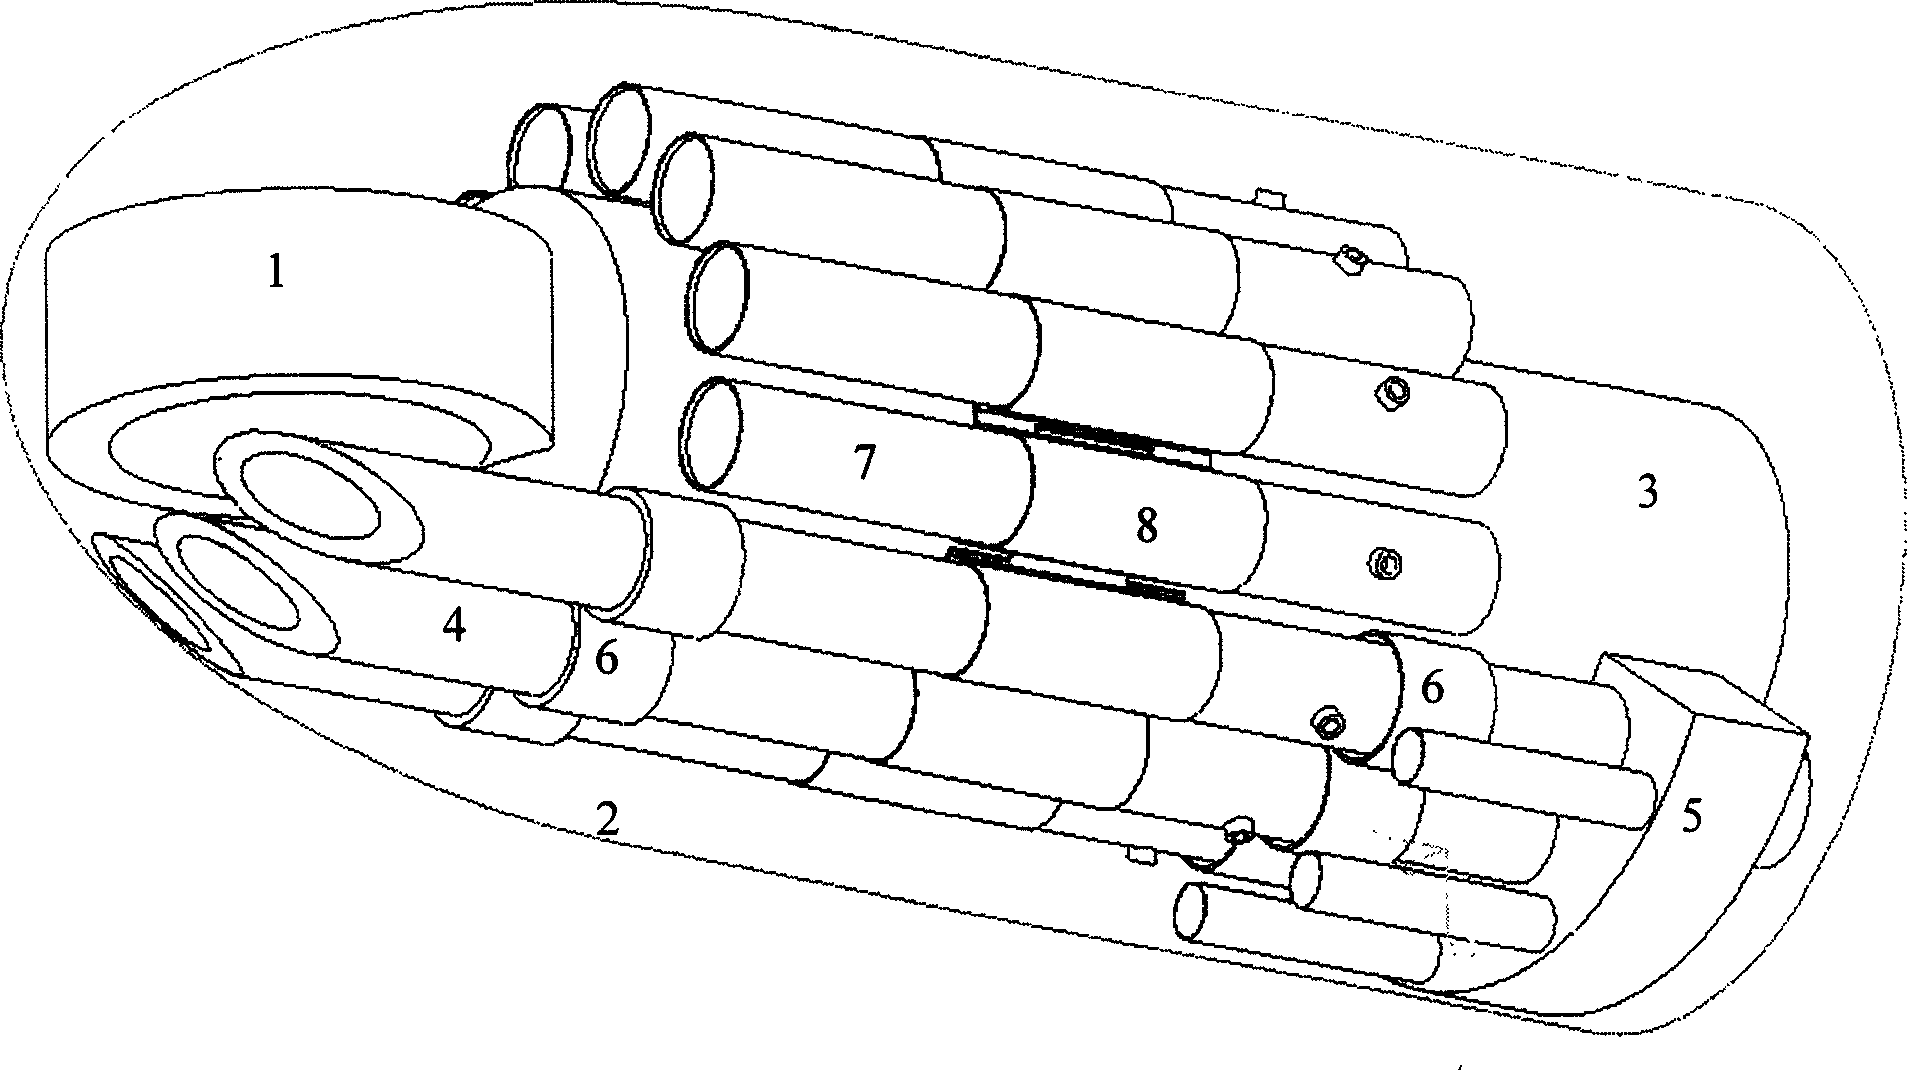 Torpedo filling device for submarine